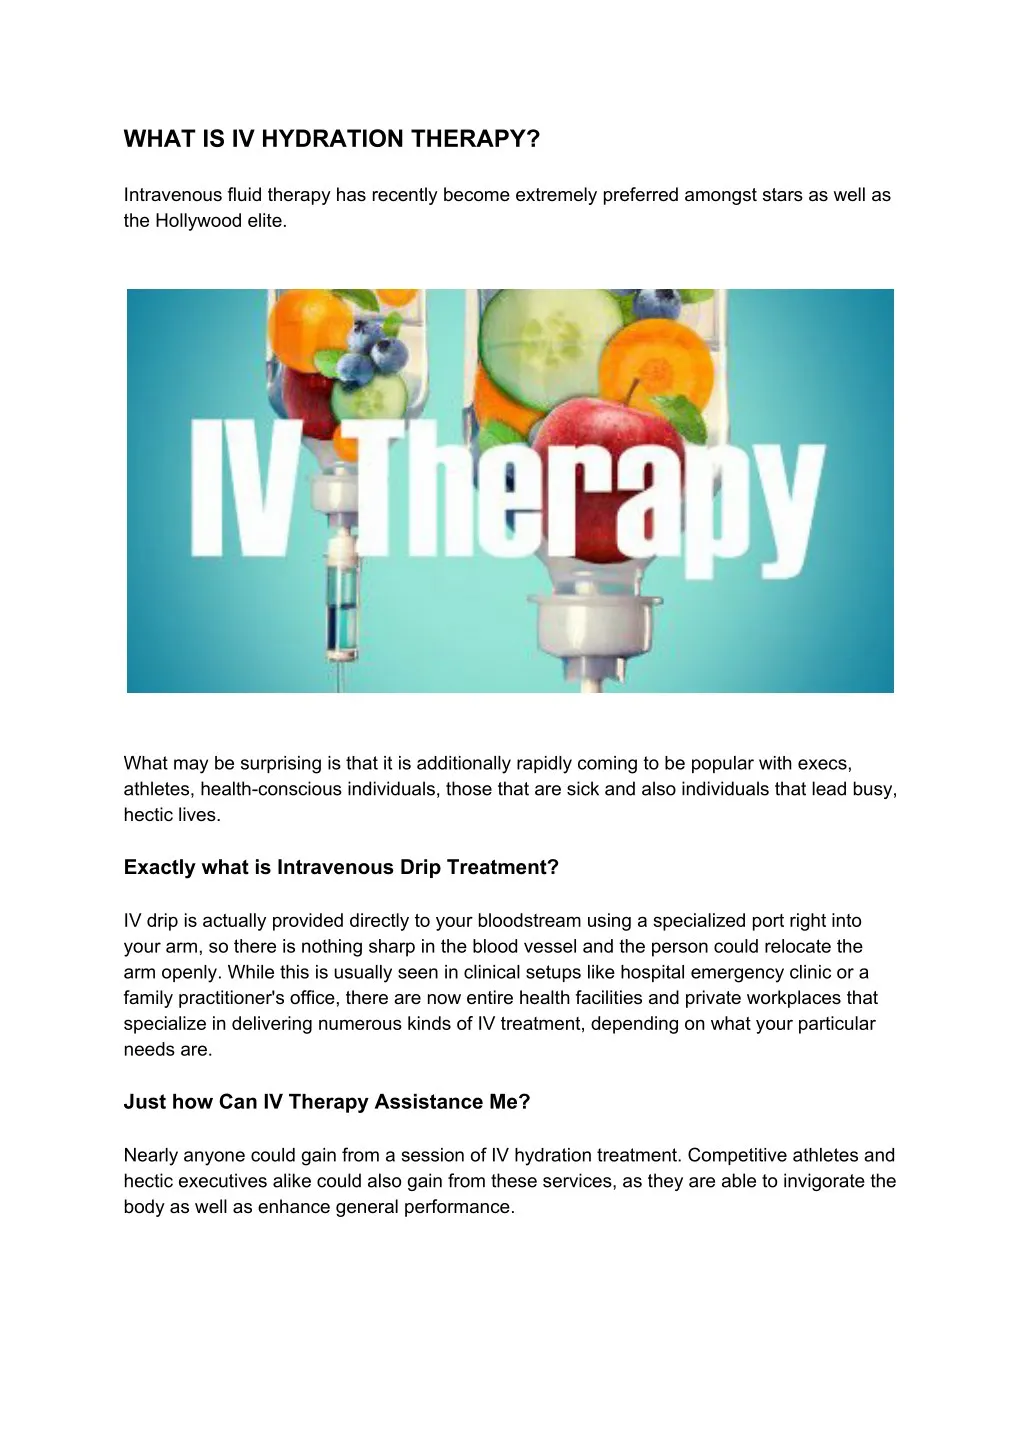 what is iv hydration therapy intravenous fluid